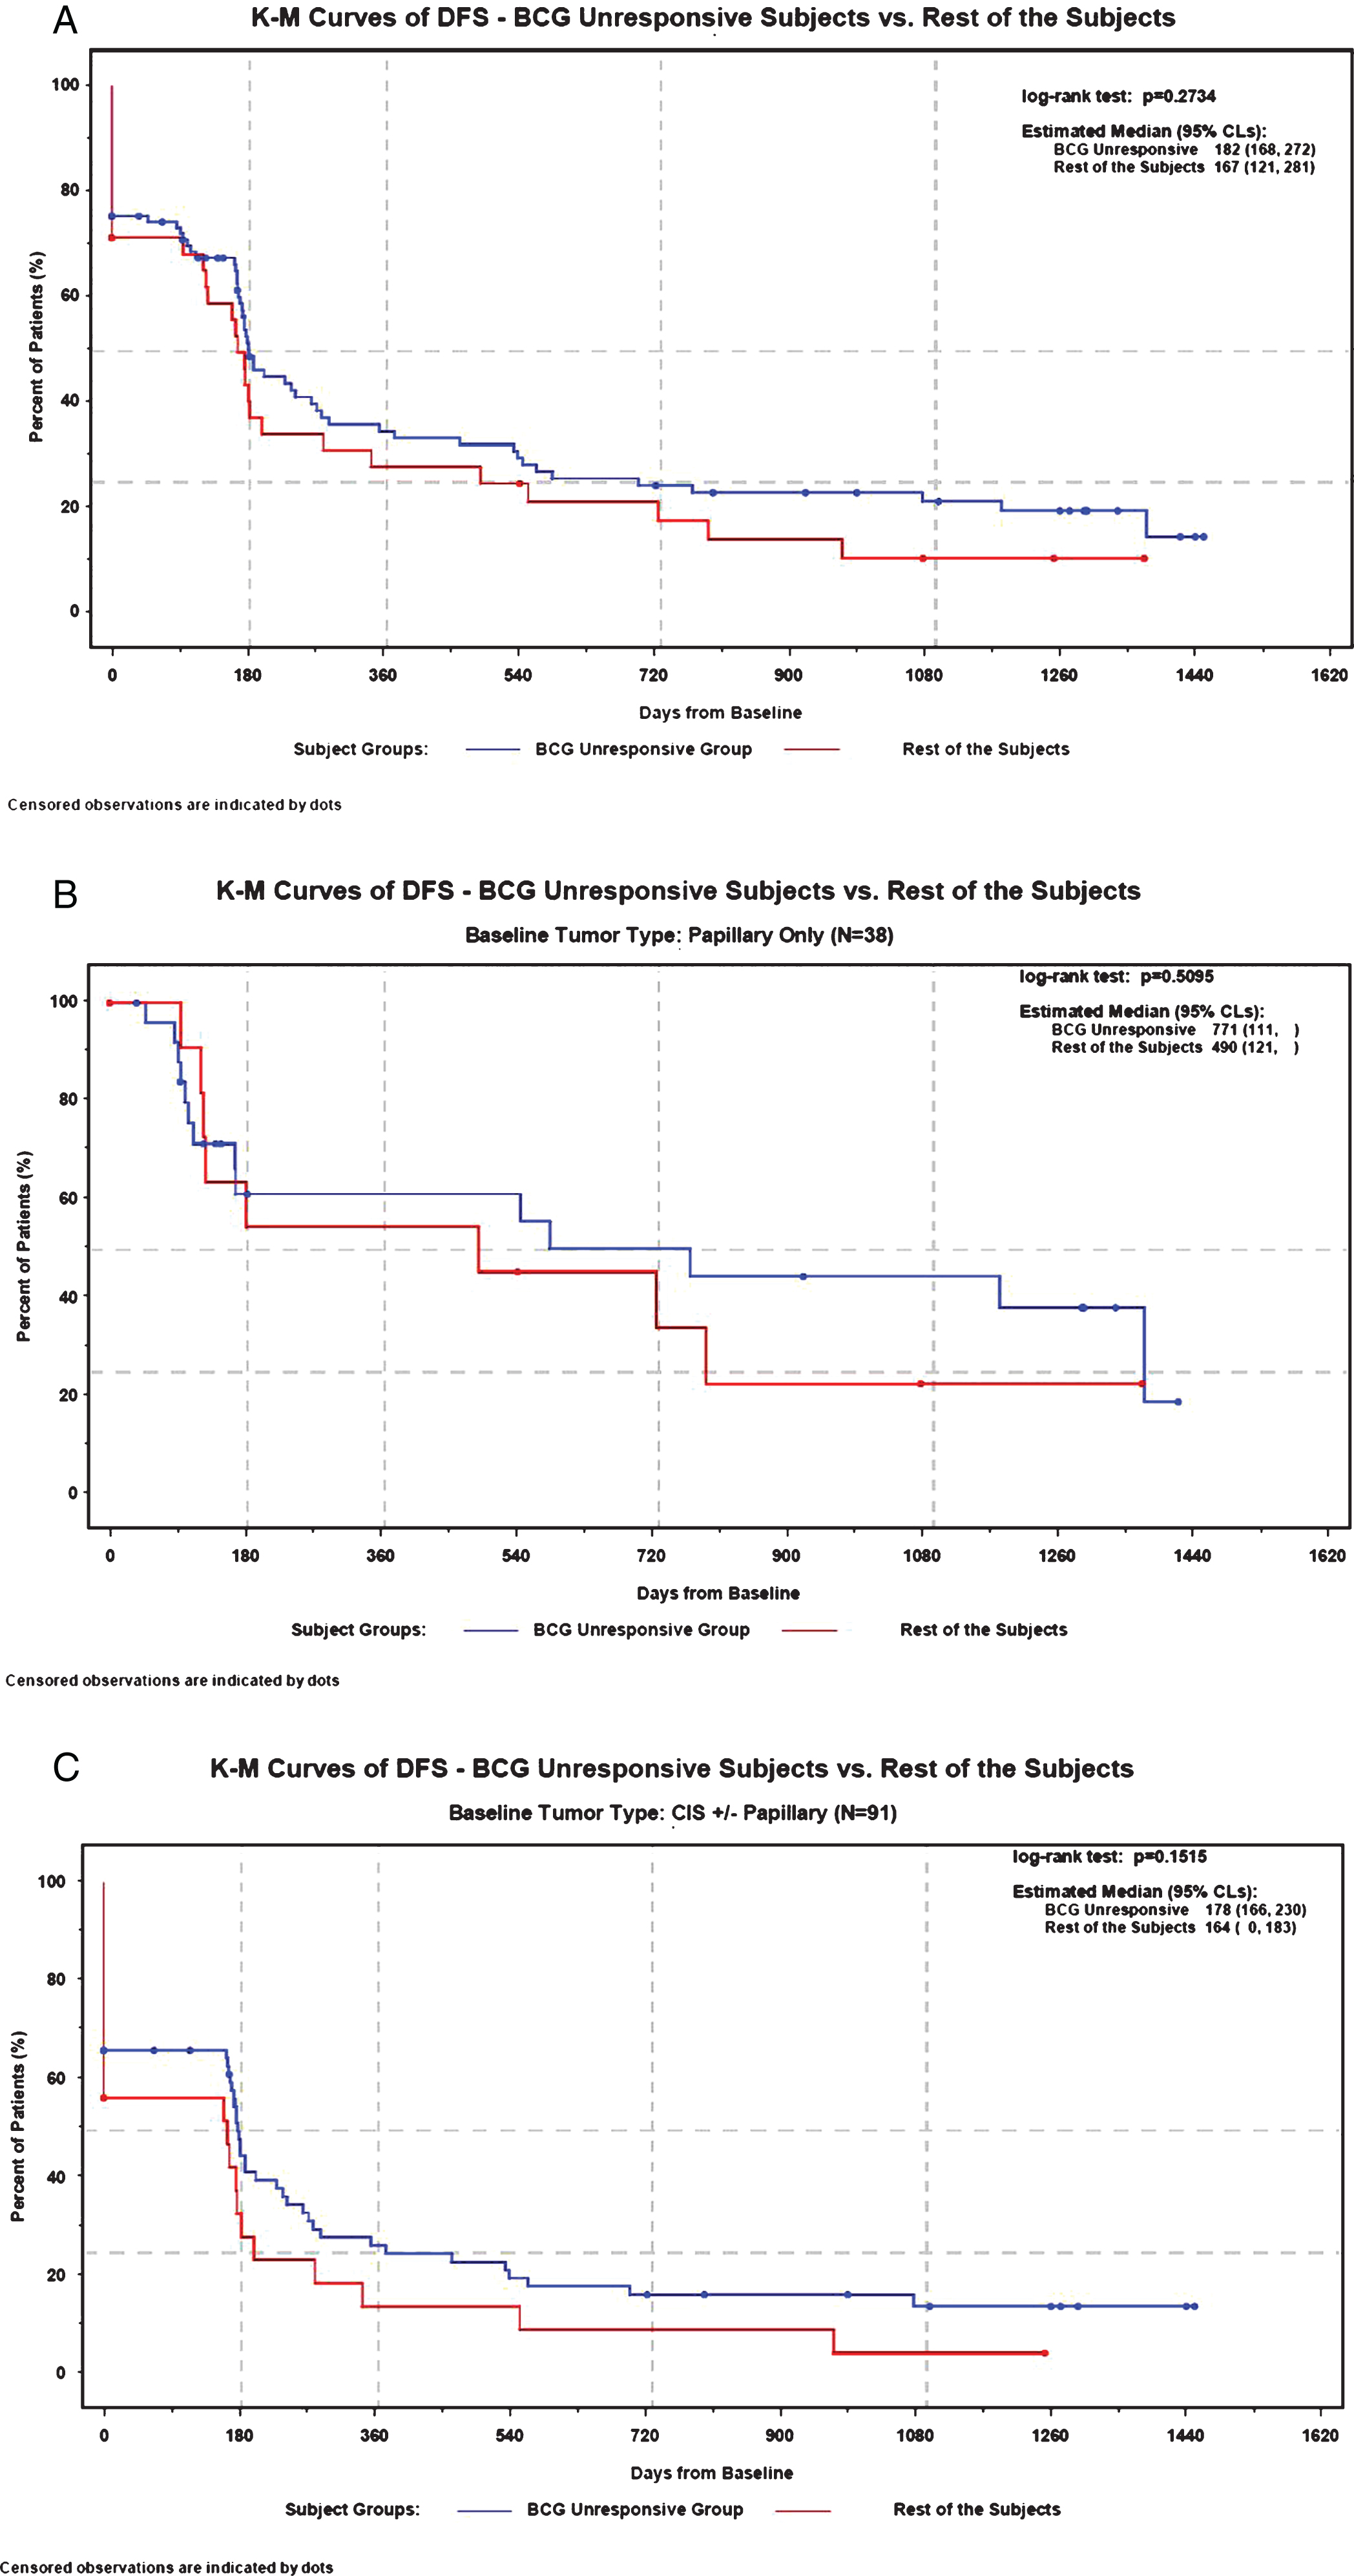 Kaplan-Meier curves showing non-statistically significant improvement in DFS after intravesical MCNA treatment in the BCG Unresponsive patients. This trend was seen in all patients (a), those with papillary only disease at baseline (b), and those with CIS with/without concurrent papillary disease at baseline (c).